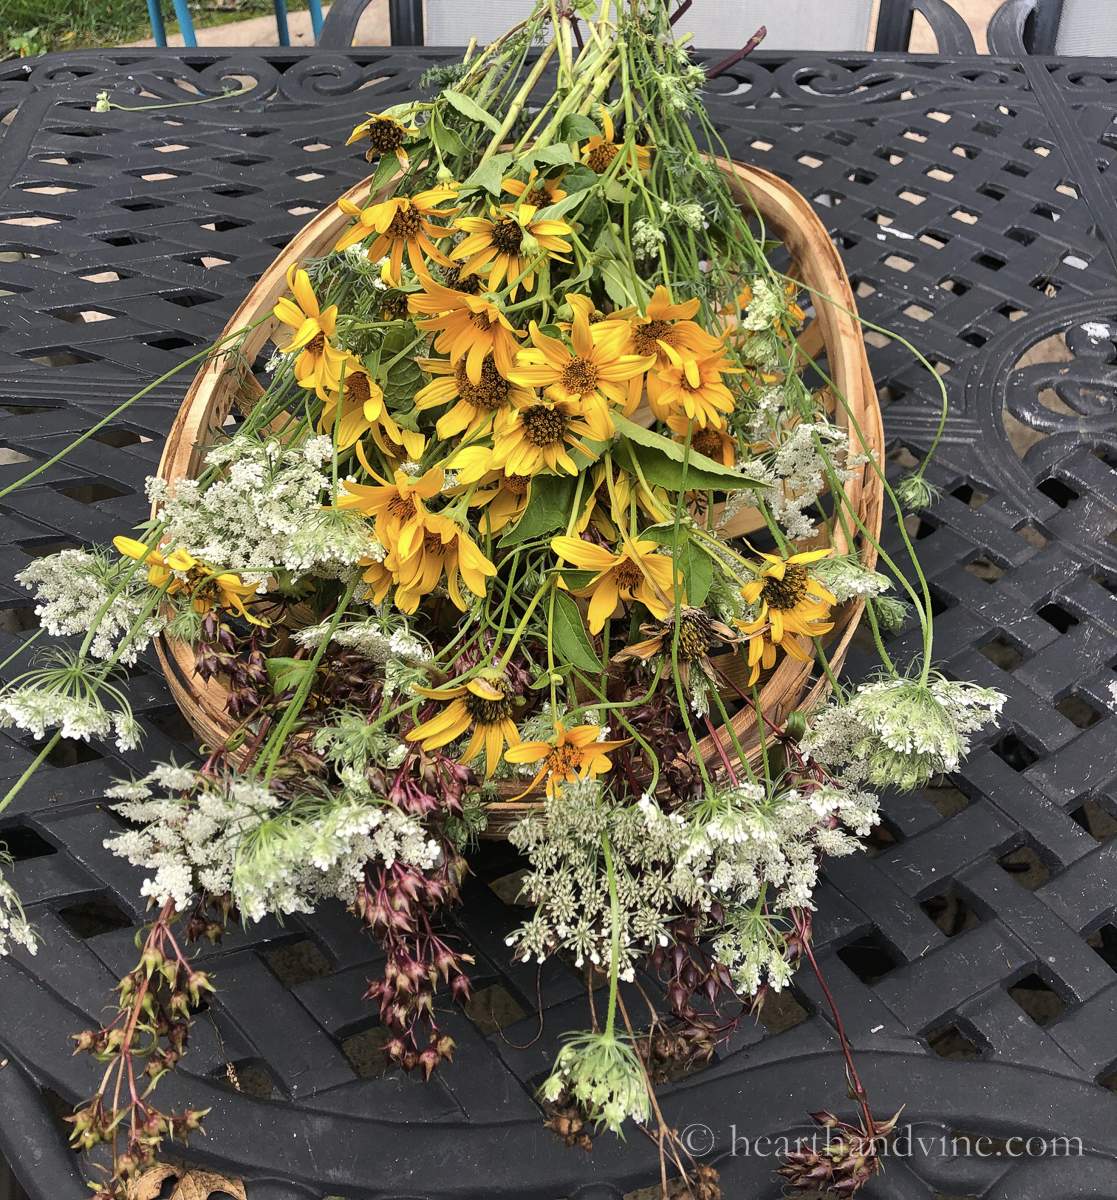 Bunches of flowers on a tobacco basket.